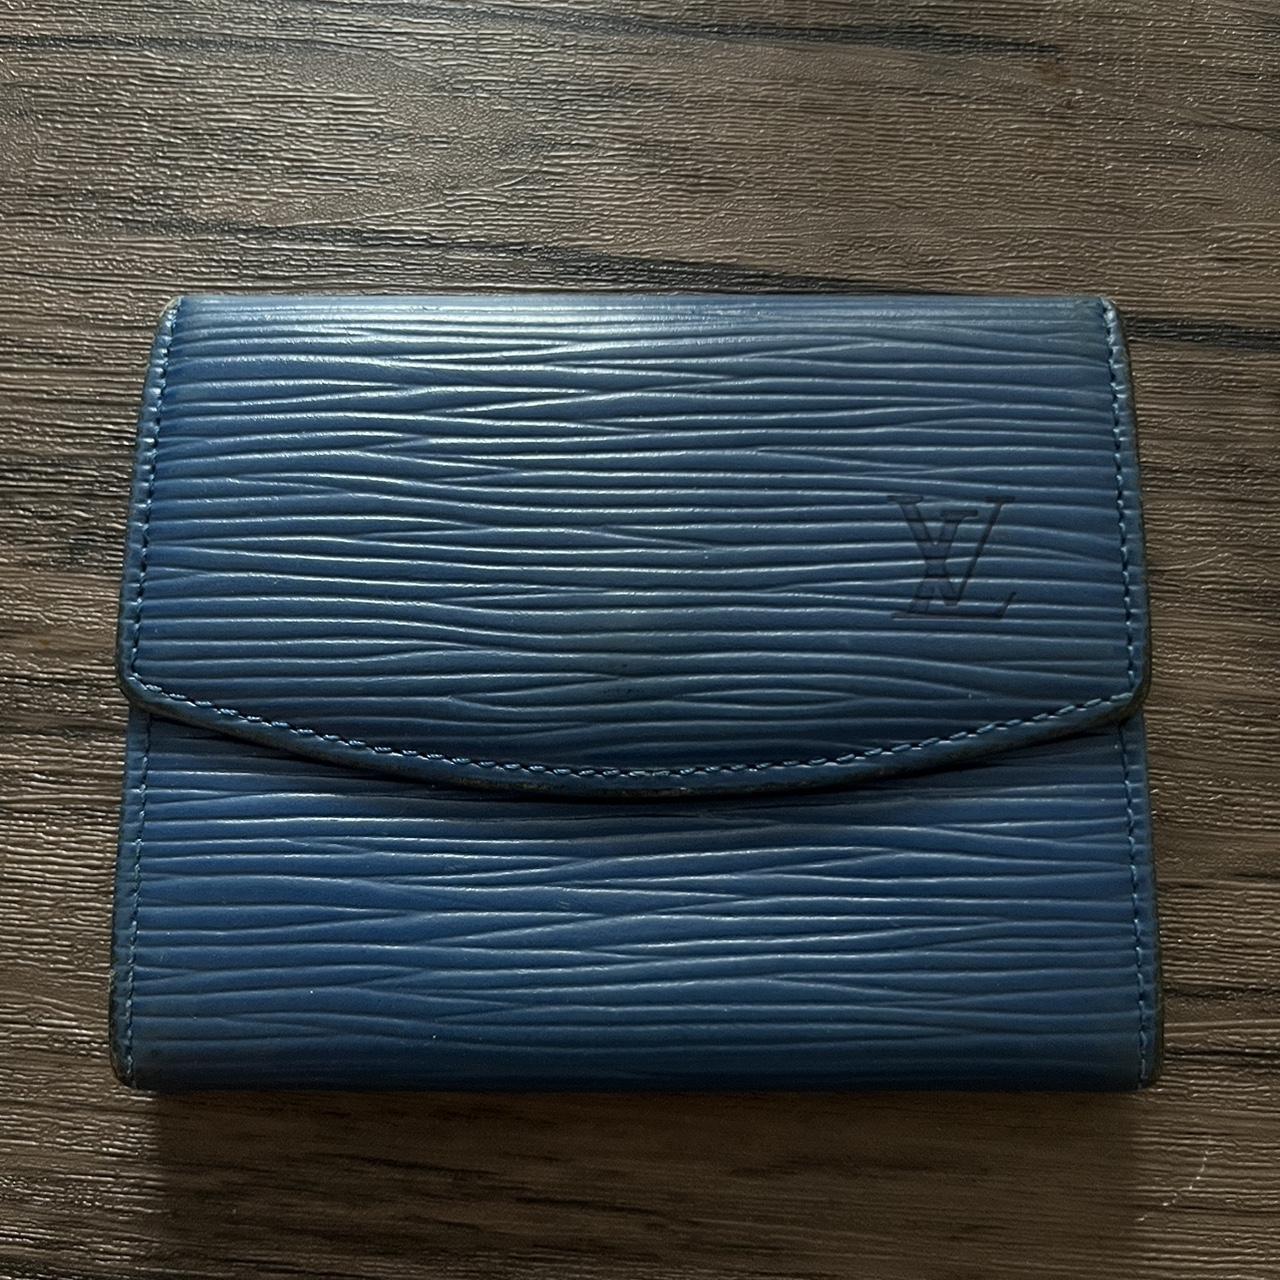 Authentic pre-loved Louis Vuitton card holder with - Depop